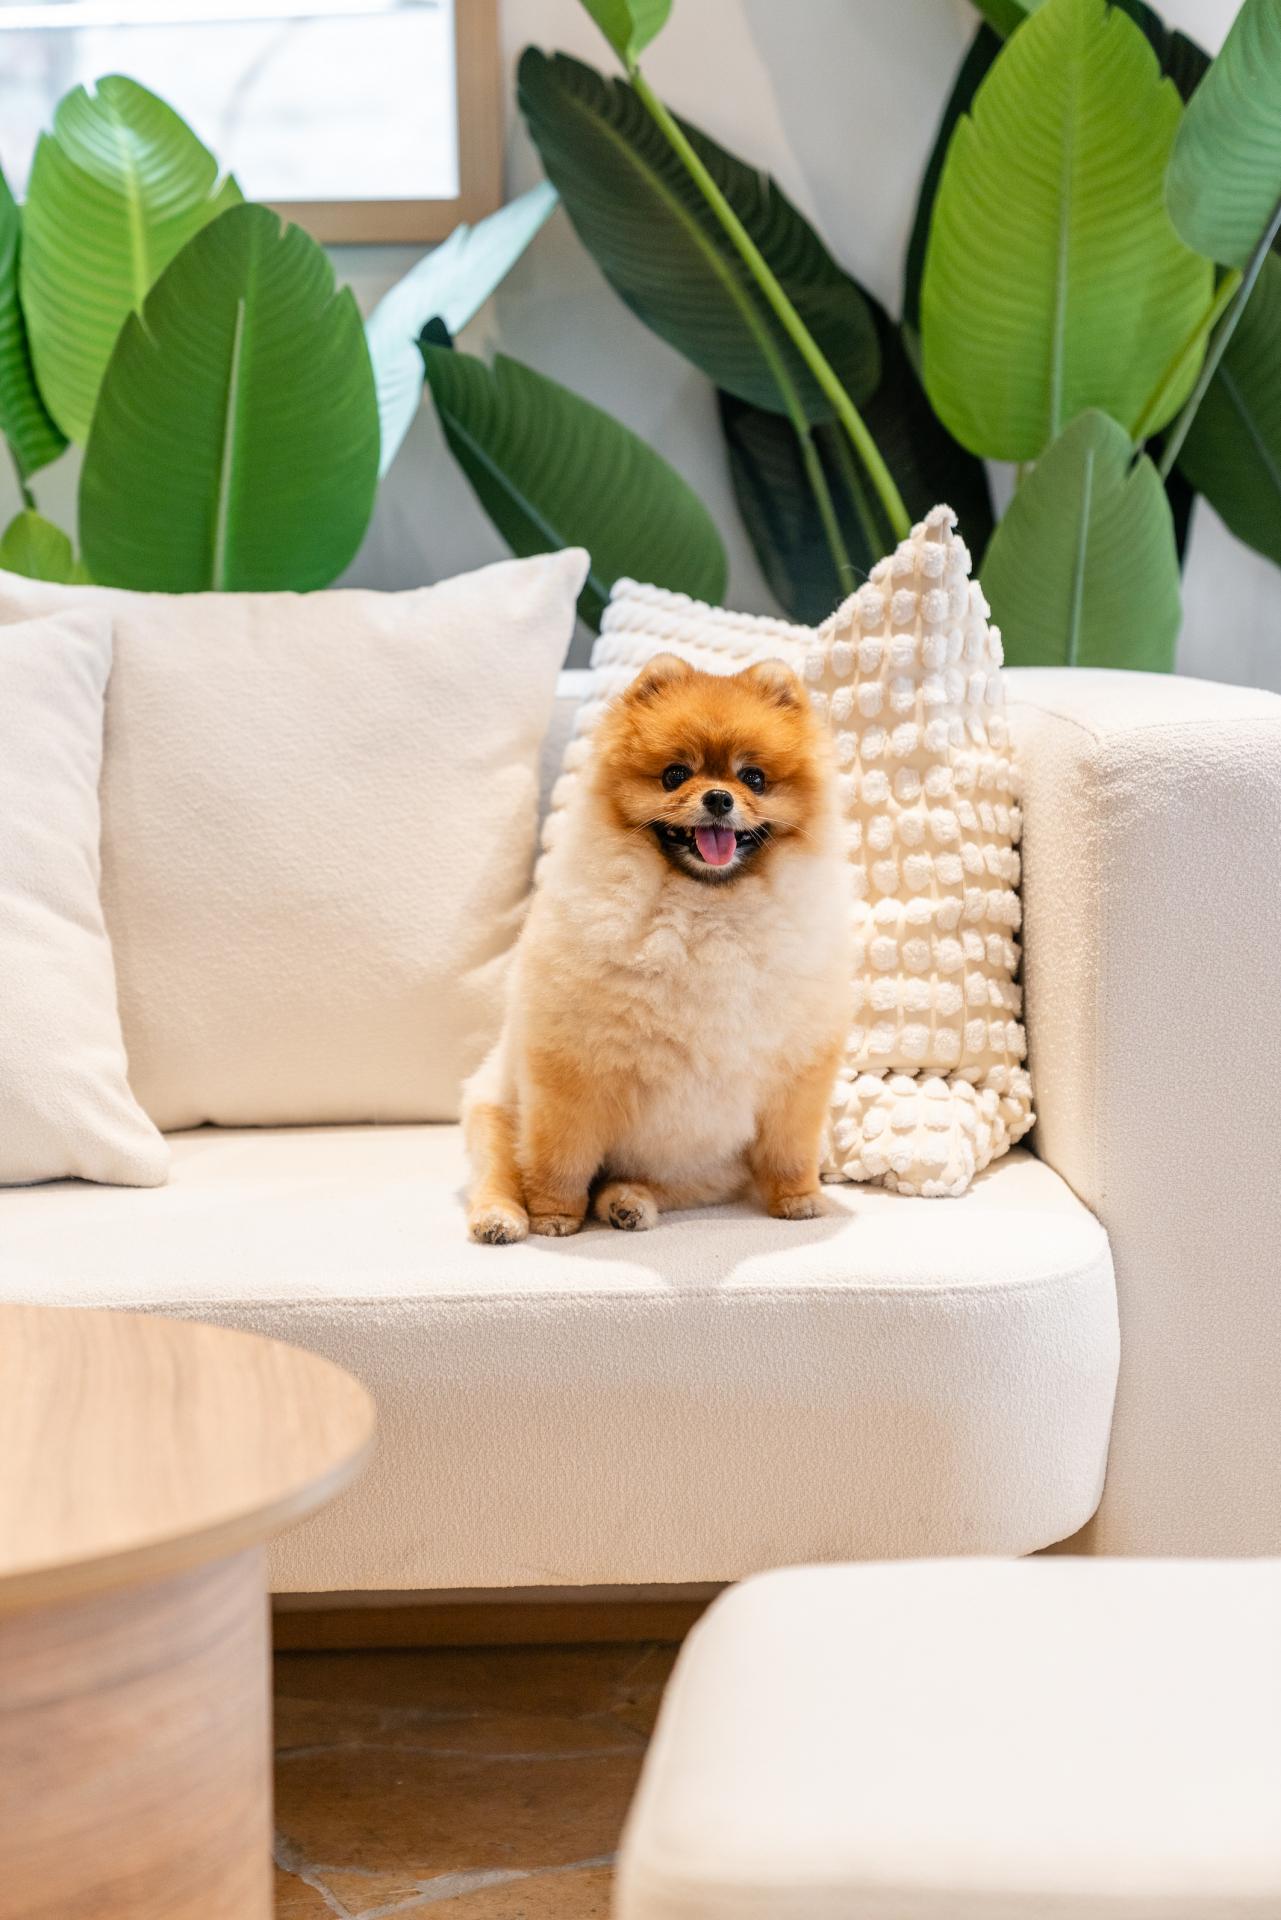 Cosy 900 sq. ft. Dog Cafe and Grooming Place BOGU! Opens in Tai Hang